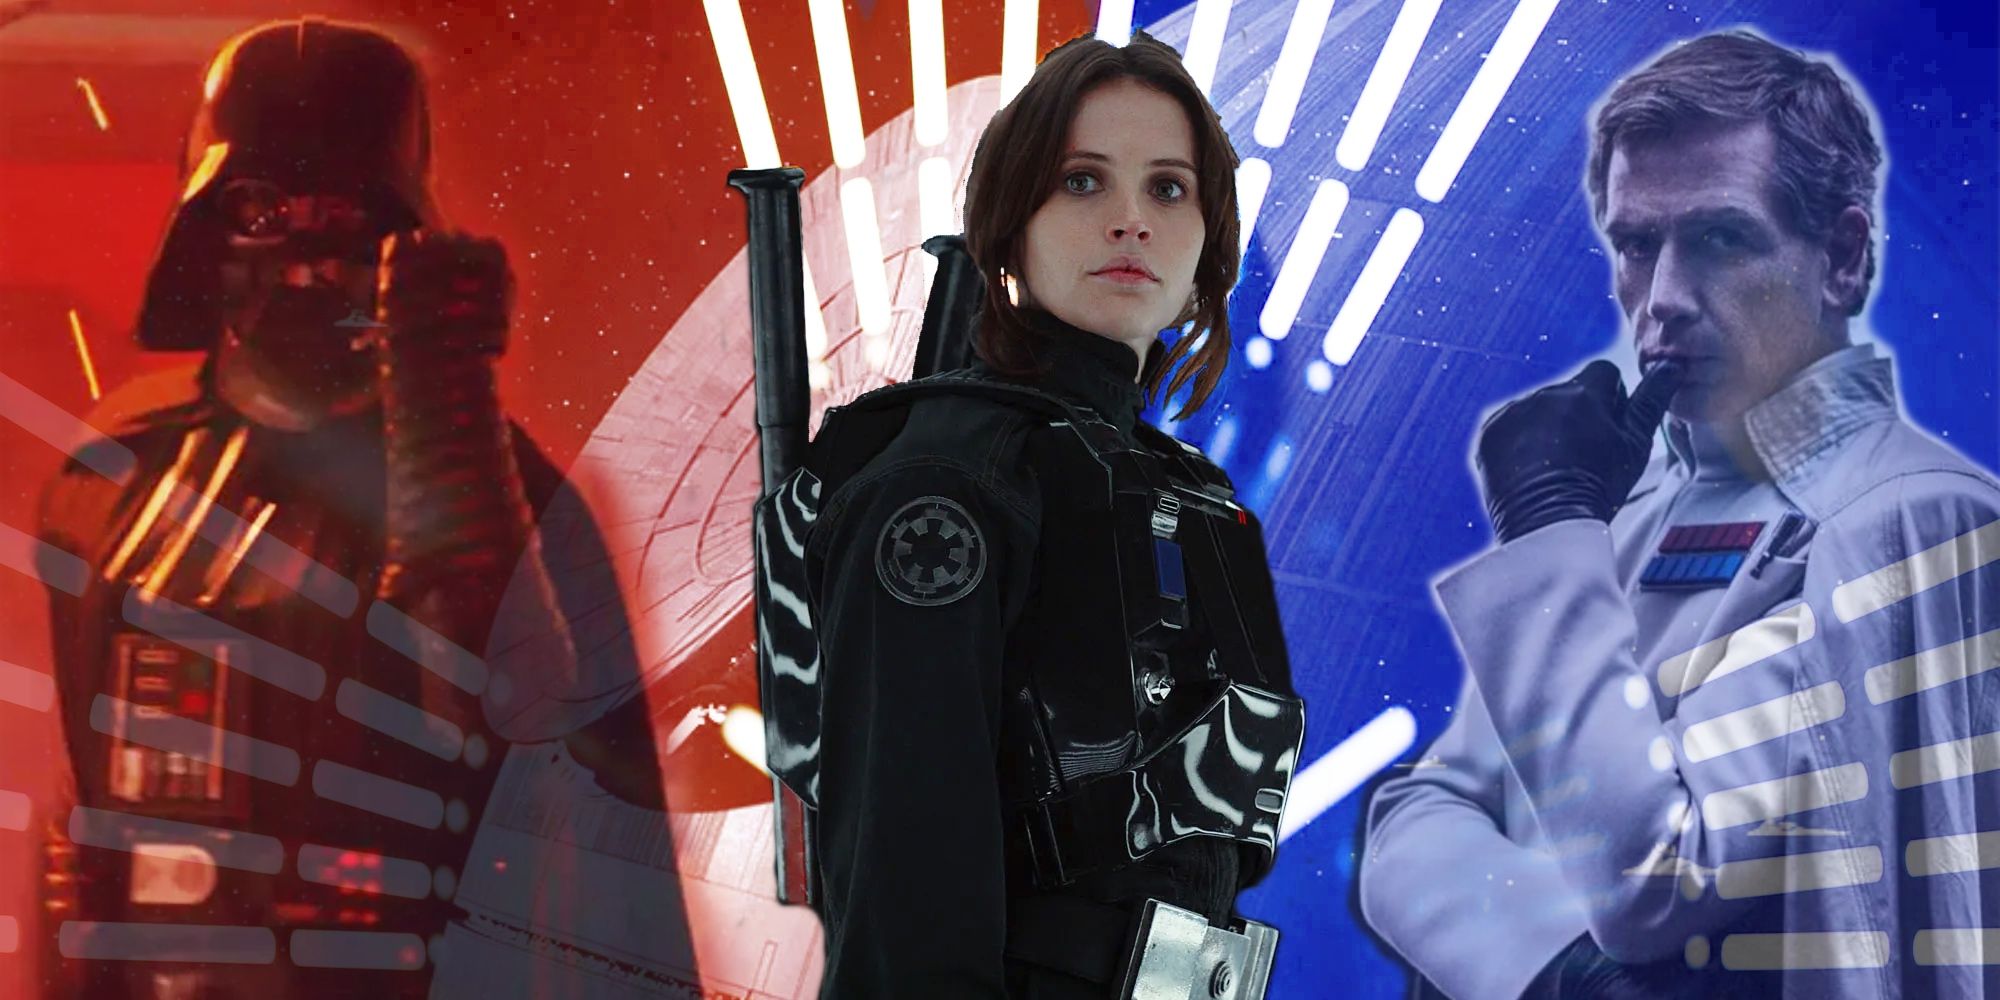 Rogue One Feature image depicting Jyn Erso at the center, and Darth Vader and Director Krennic on either side of her. Krennic and Vader are partially faded out to give prominence to Jyn, and all characters stand in front of the newly constructed Death Star with an orange to blue fade.